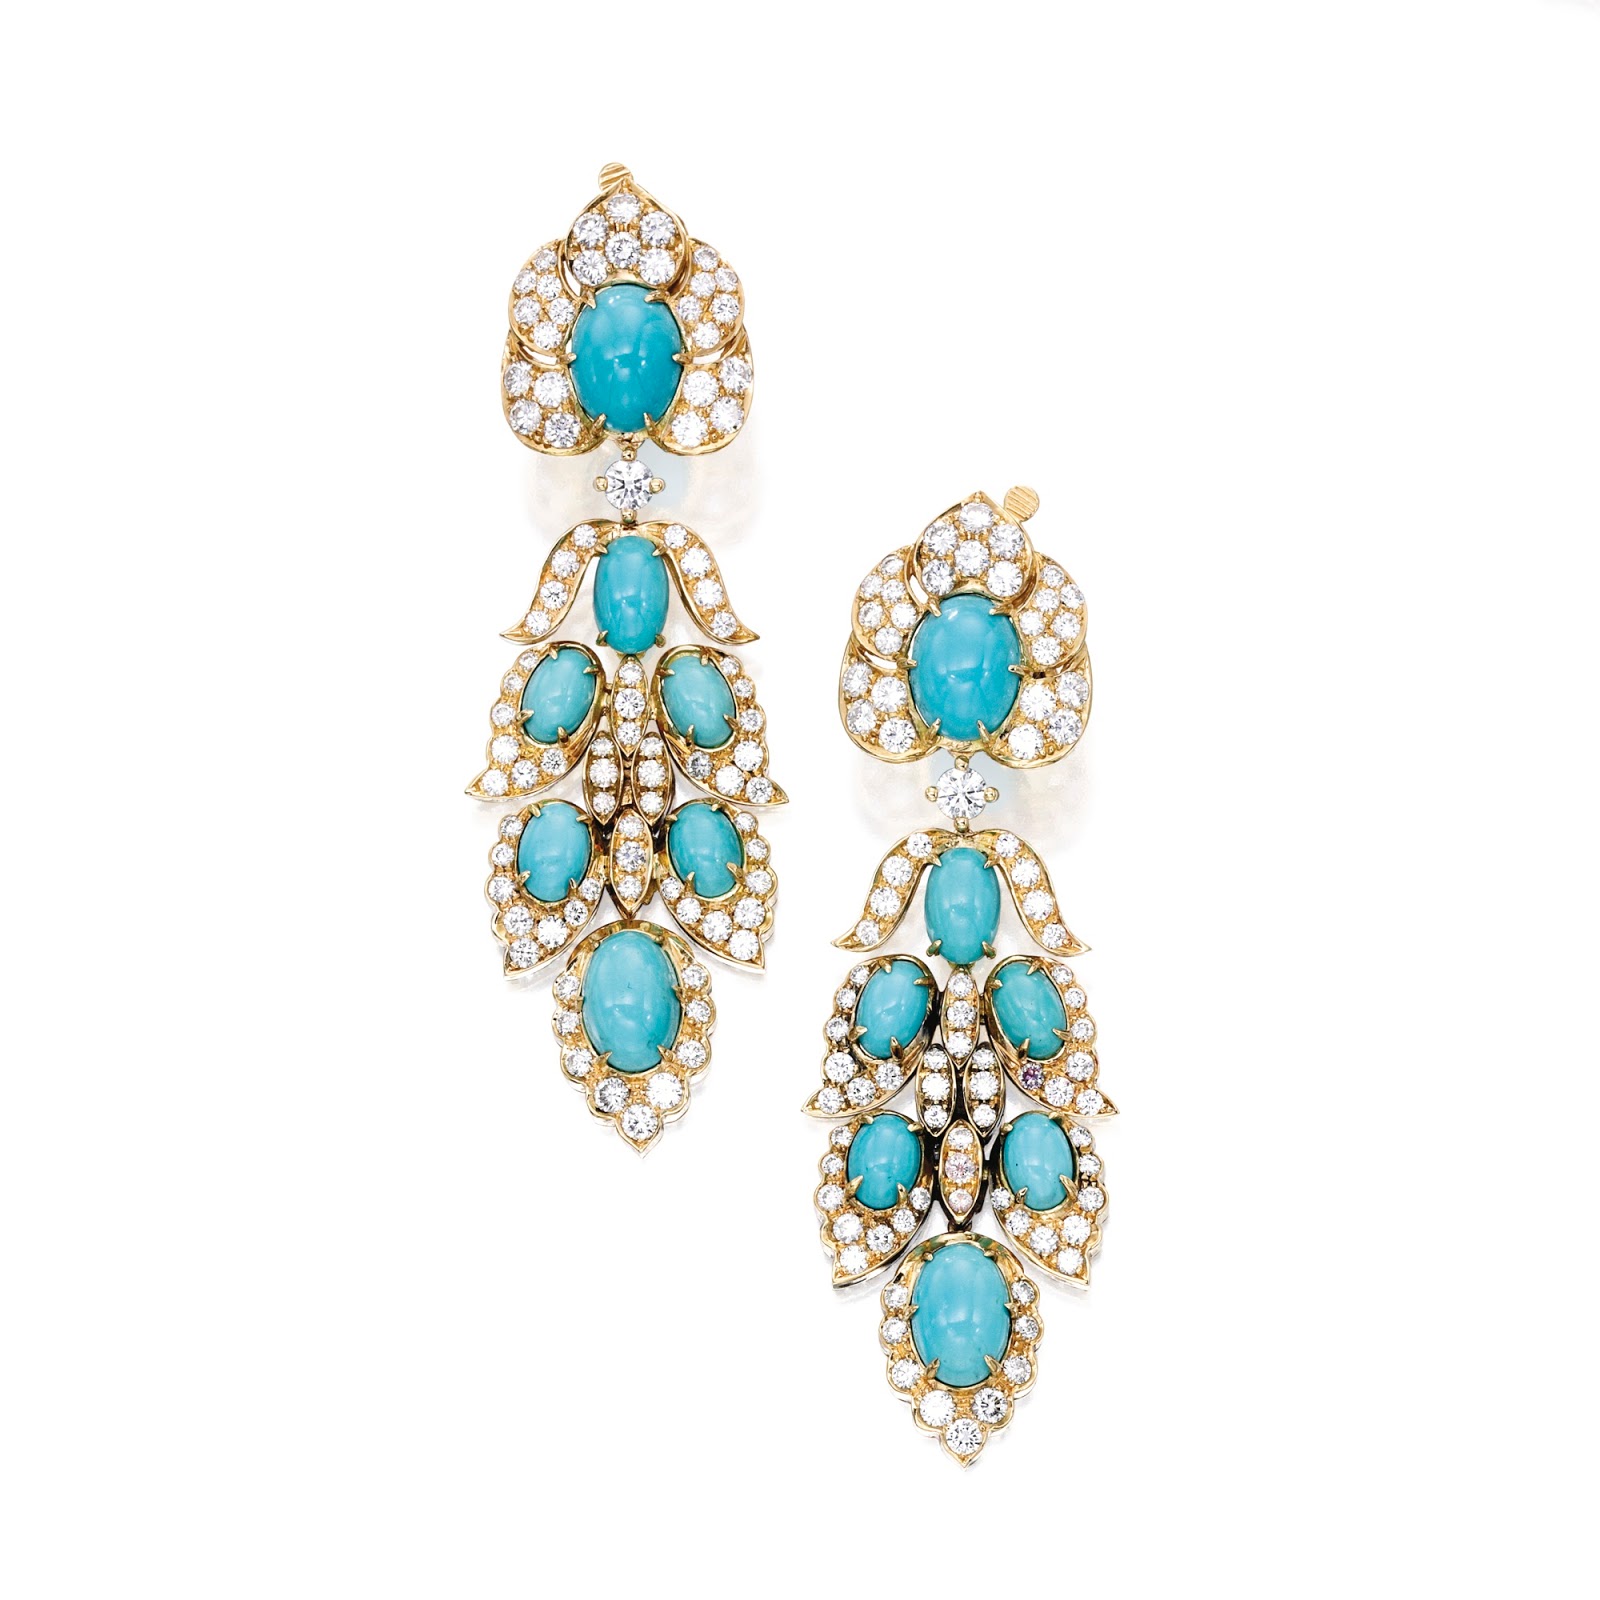 Marie Poutine's Jewels & Royals: Turquoise Earrings